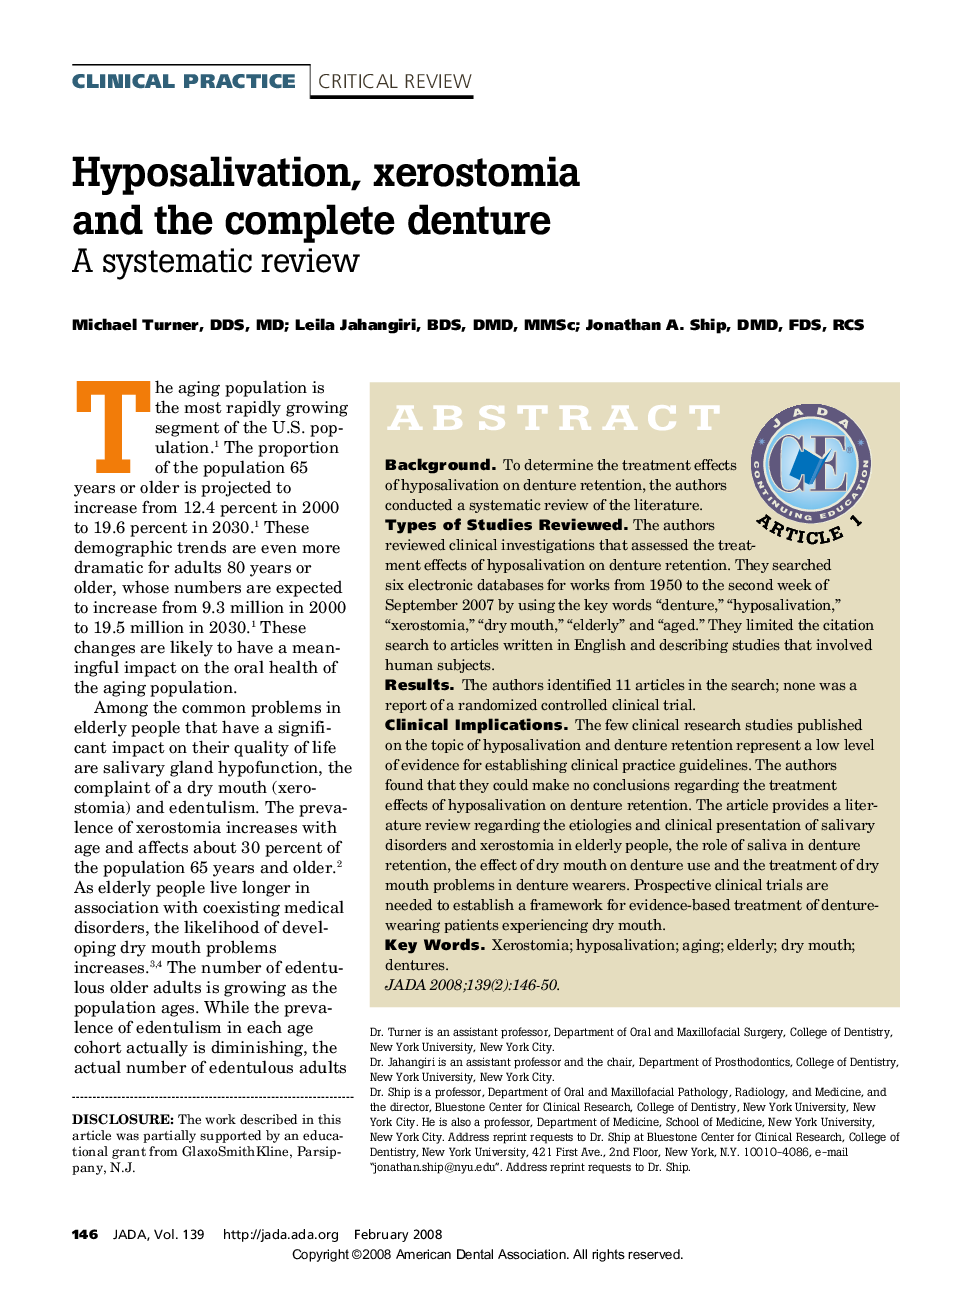 Hyposalivation, xerostomia and the complete denture